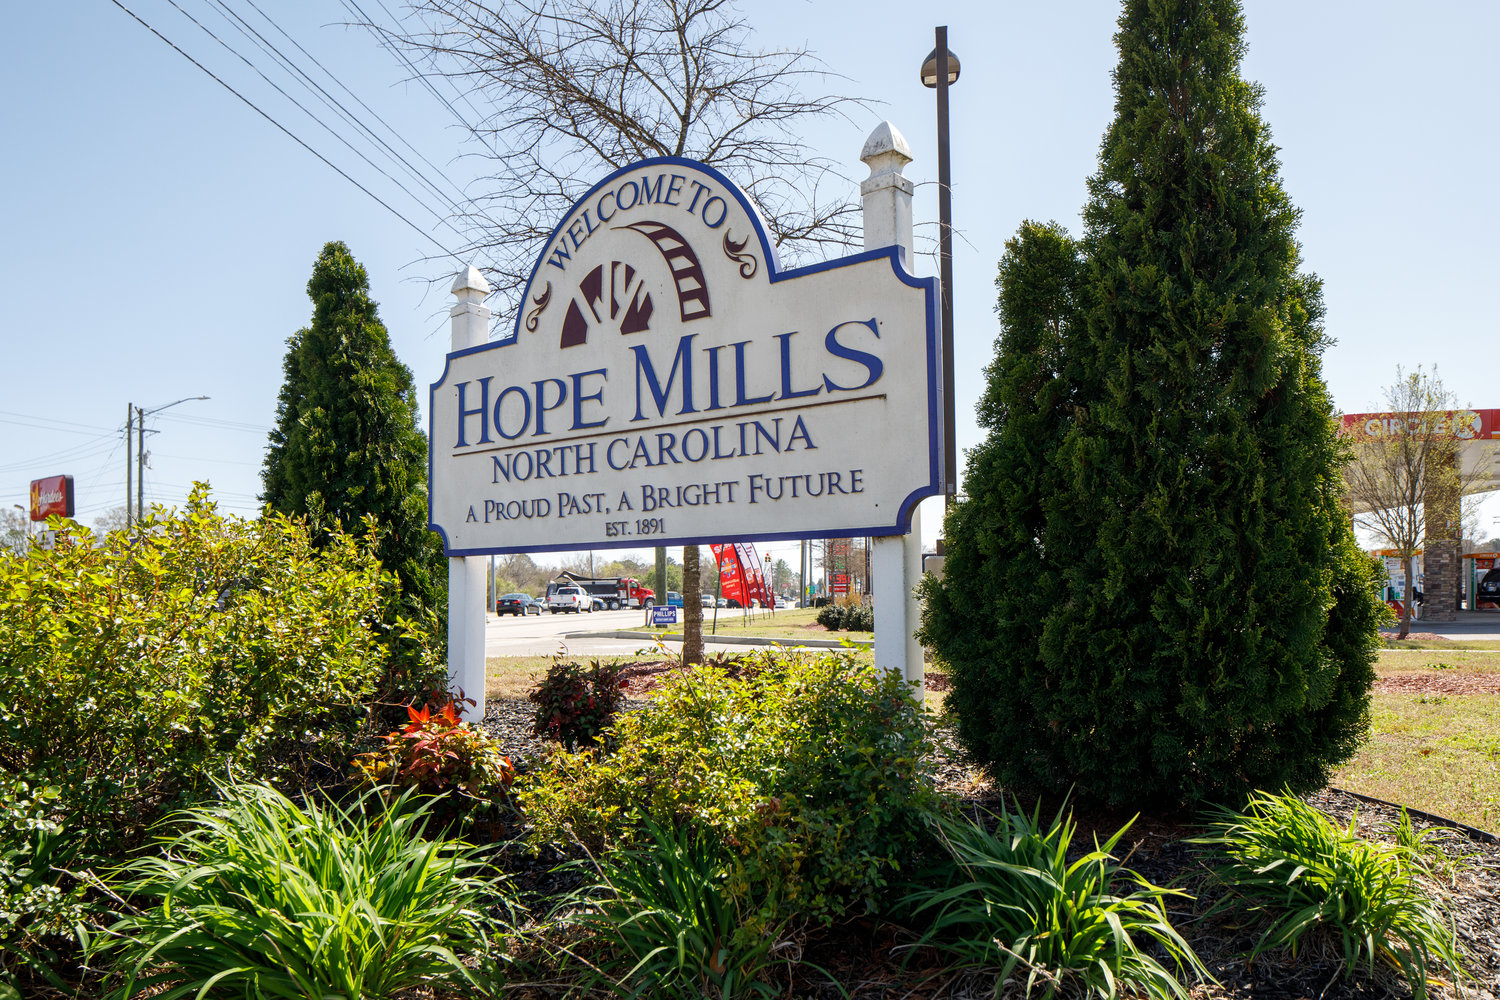 The Hope Mills Board of Commissioners on Monday is holding a public hearing on a proposed moratorium on some businesses while staff works on drafting an overlay district policy.